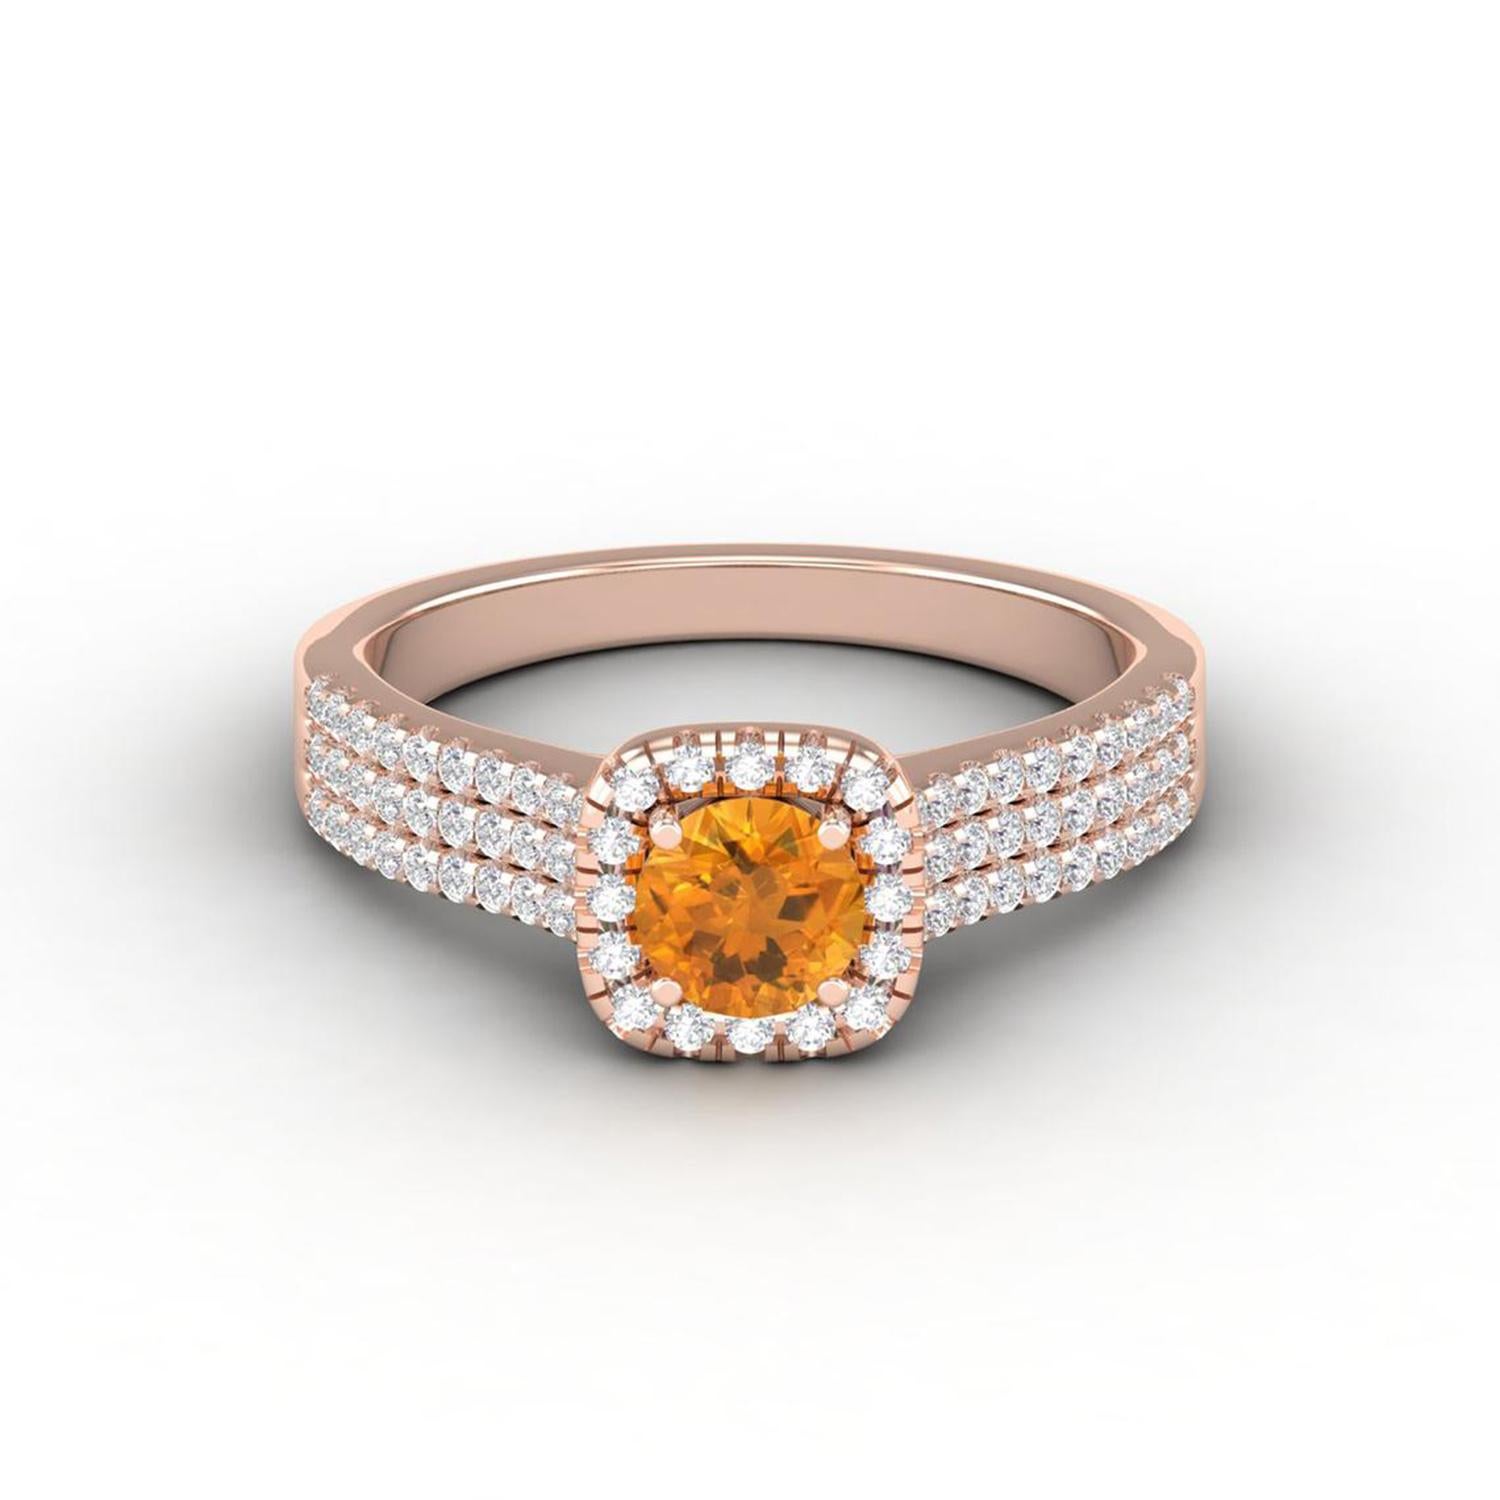 Women's 14 Karat Gold Yellow Citrine Ring / Diamond Solitaire Ring / Ring for Her For Sale